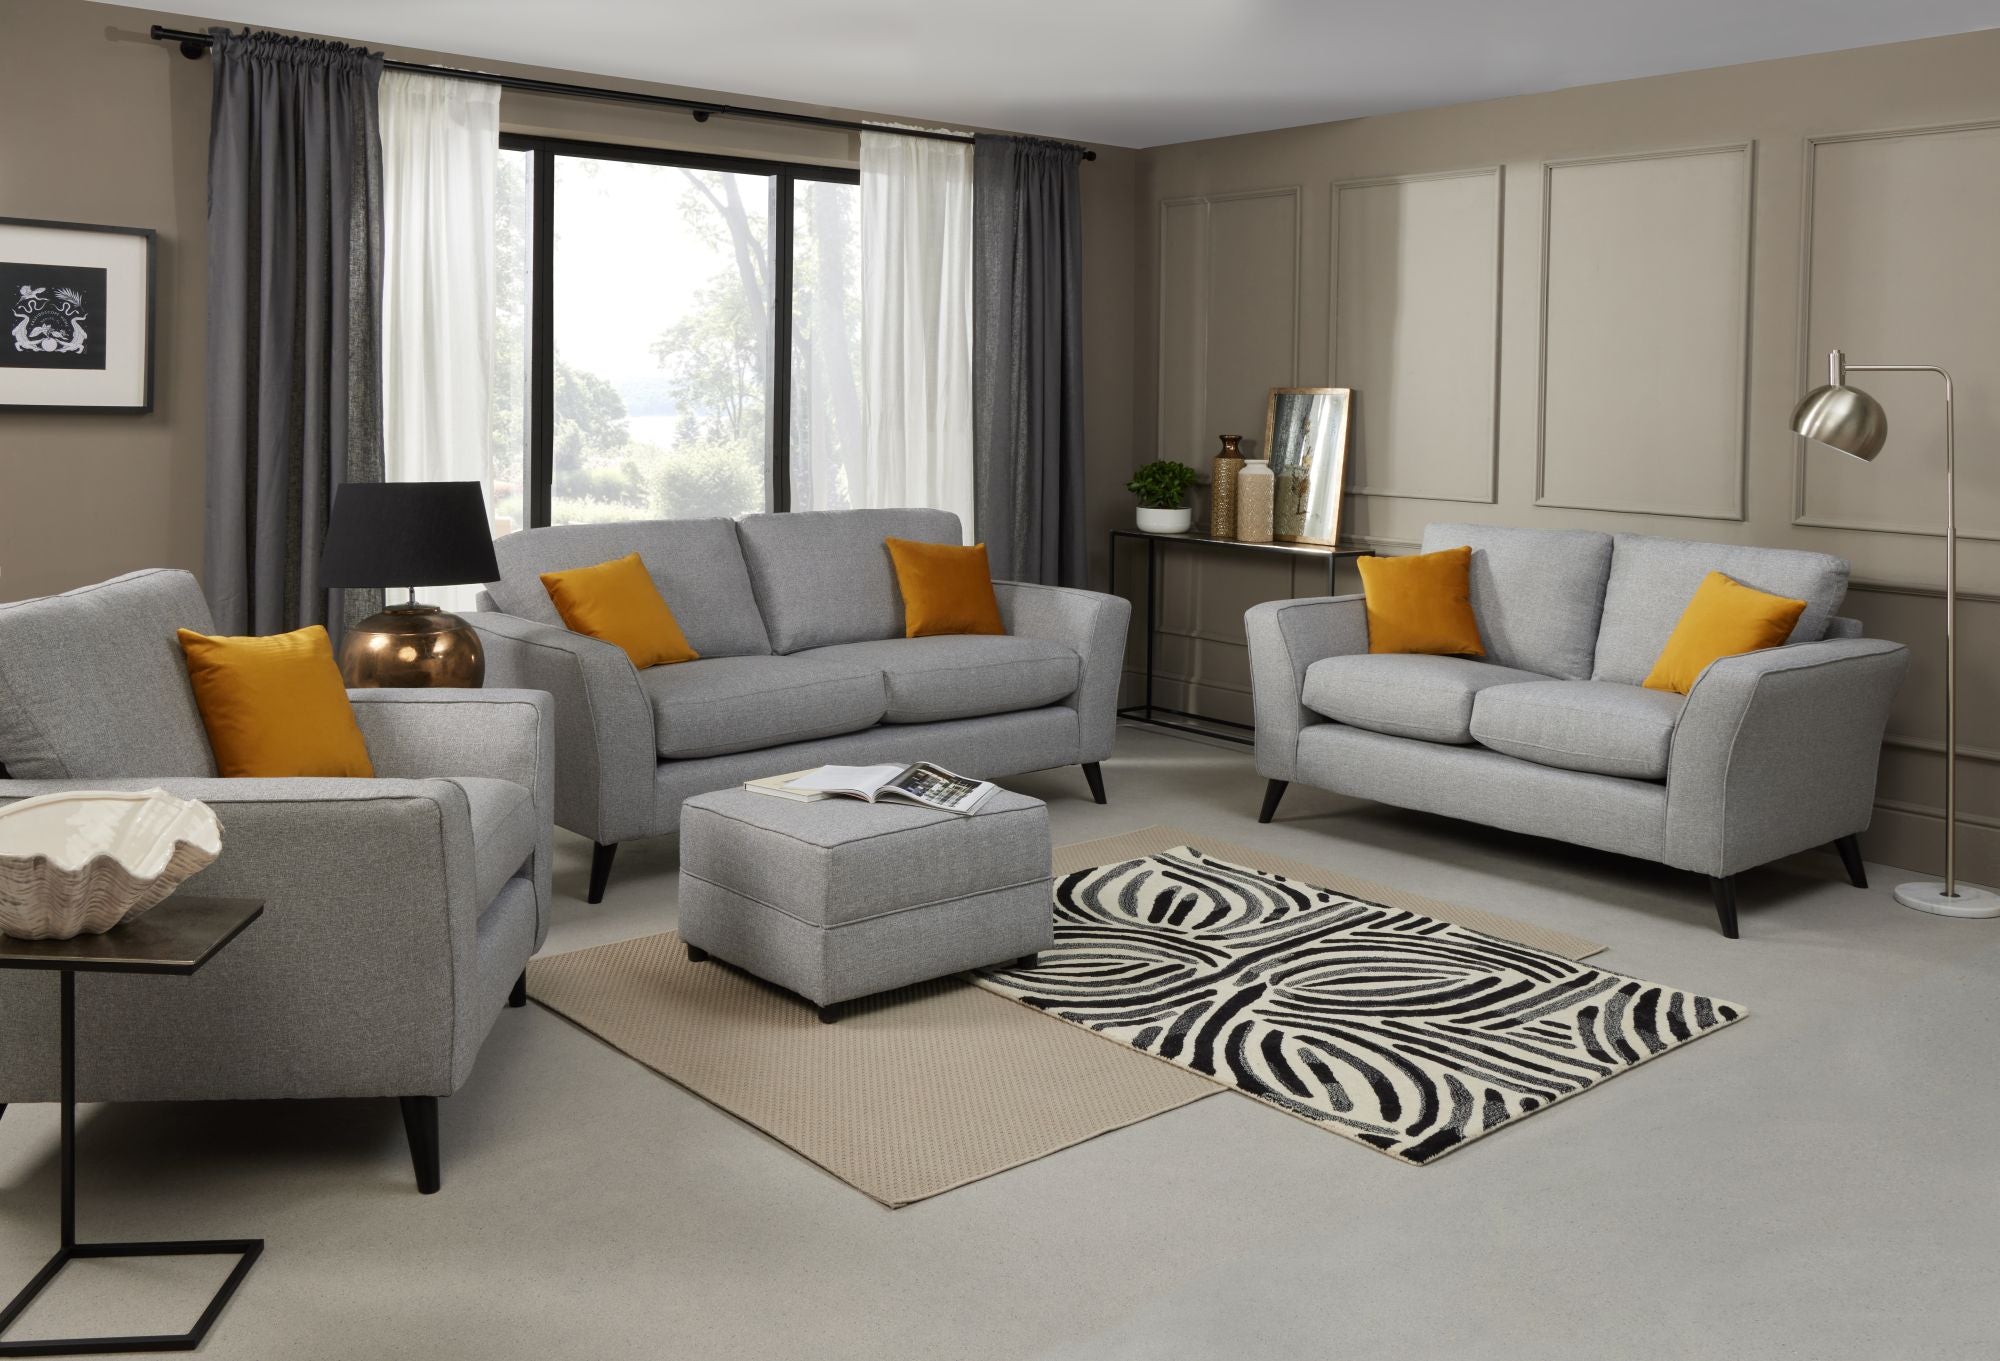 Libby 2 seater, 3 seater, armchair and footstool in Silver shown in a room setting 